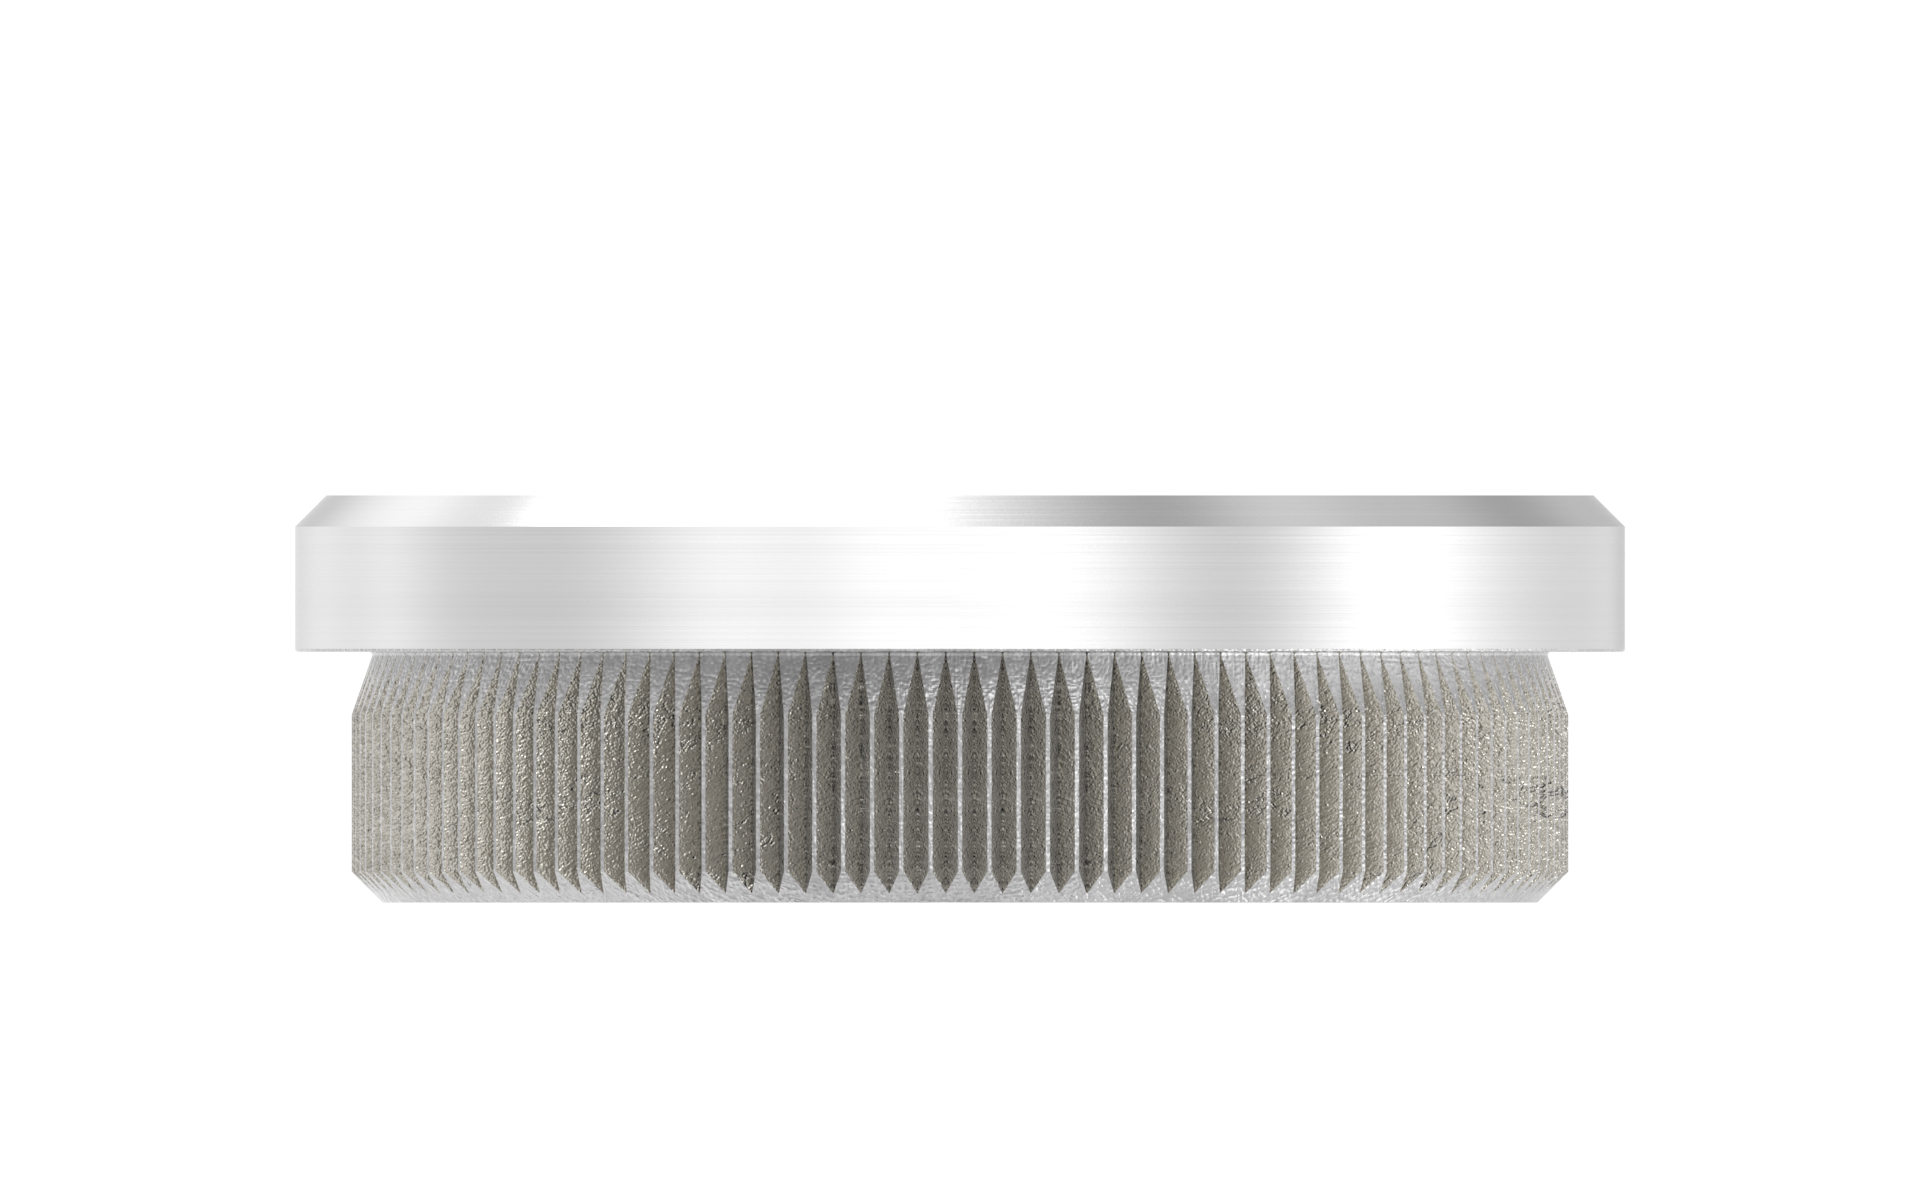 Hollow end cap d=33,7x2mm with knurl in flat and with drainage borehole AISI 304 satin finish